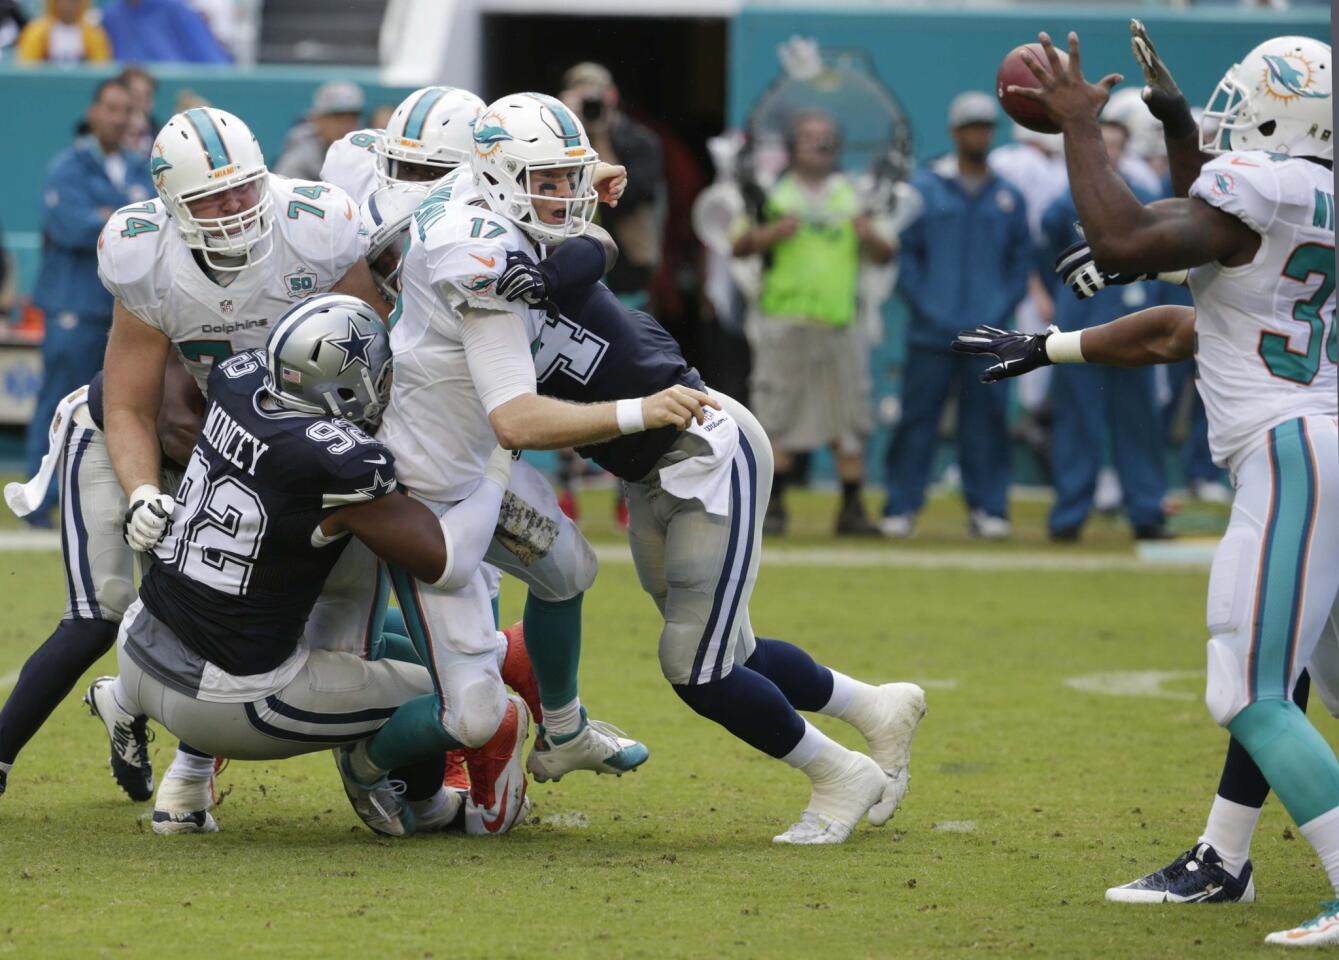 Miami Dolphins quarterback Ryan Tannehill (17) pitches the ball to running back Damien Williams (34) during the first half of an NFL football game against the Dallas Cowboys, Sunday, Nov. 22, 2015, in Miami Gardens, Fla. (AP Photo/Lynne Sladky) ORG XMIT: SLS107